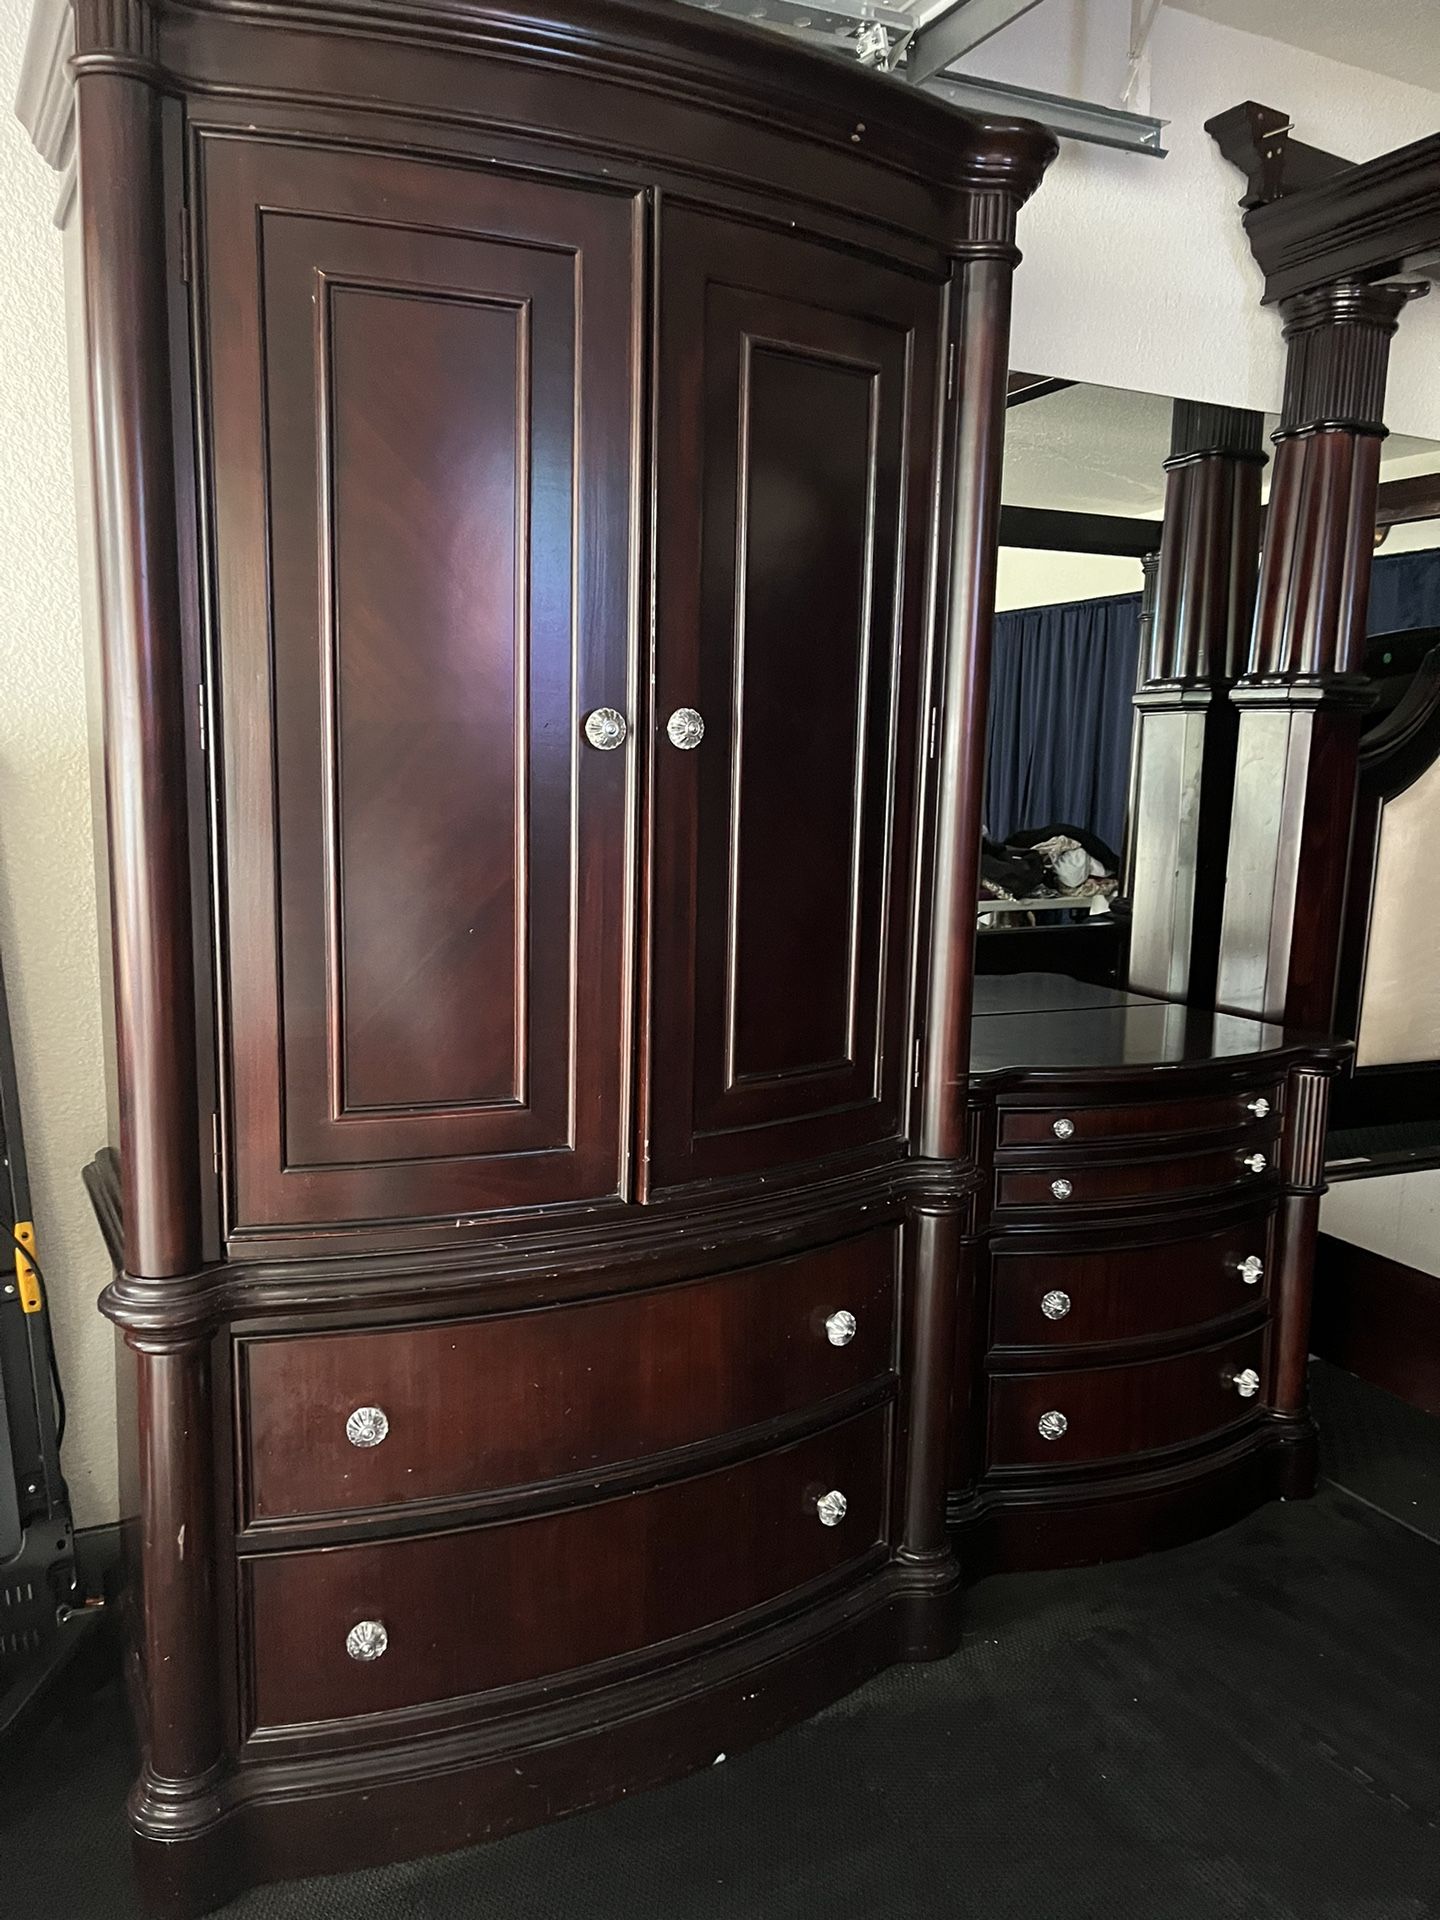 King Size Bed Frame With Nightstands